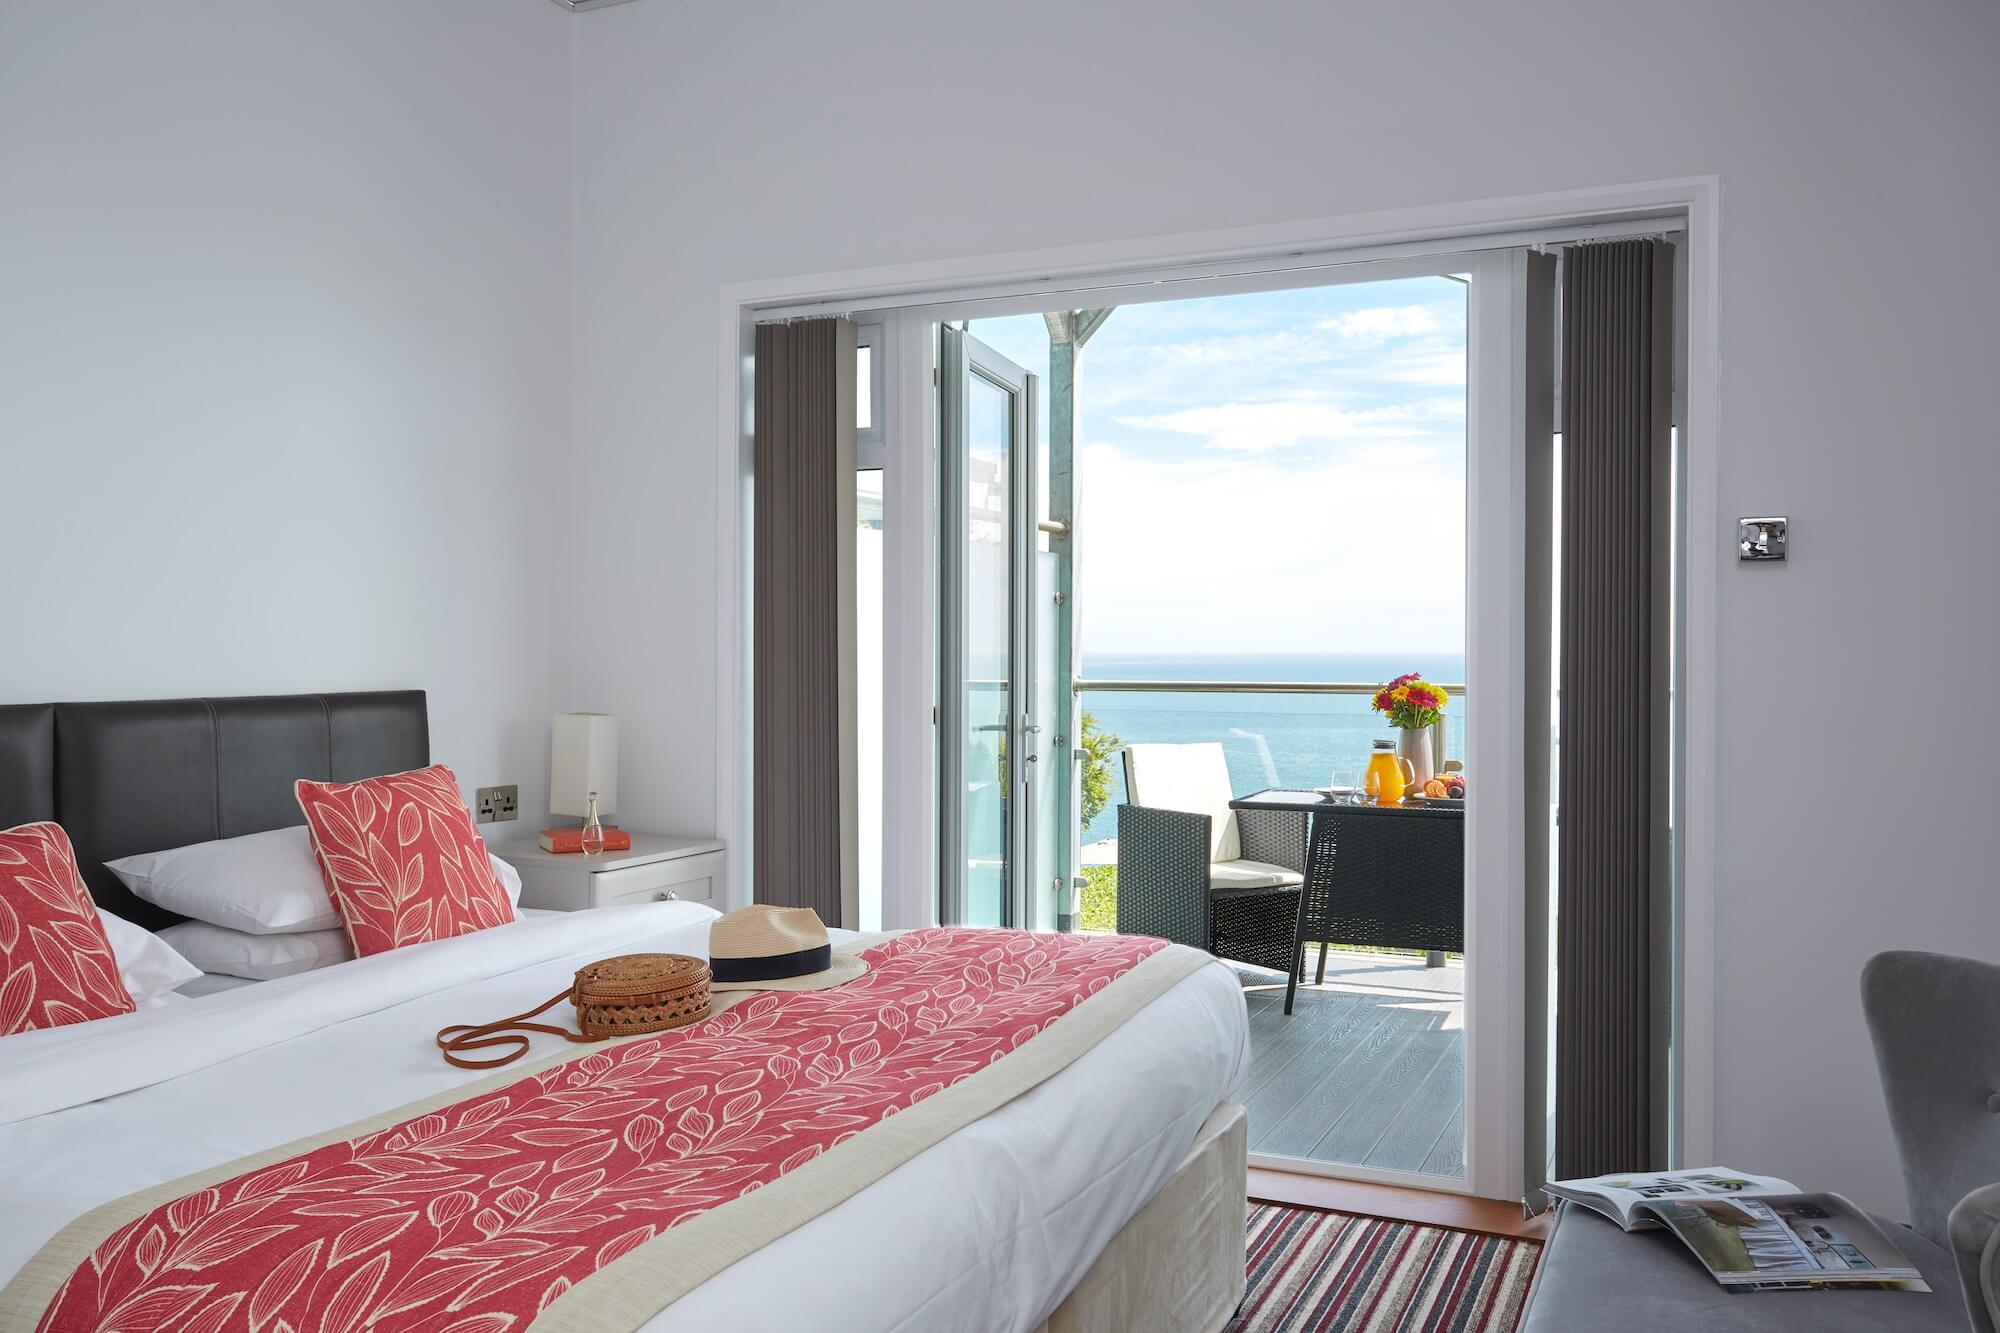 Sea-Facing Room with Balcony, Luccombe Hall Hotel, Shanklin, Isle of Wight